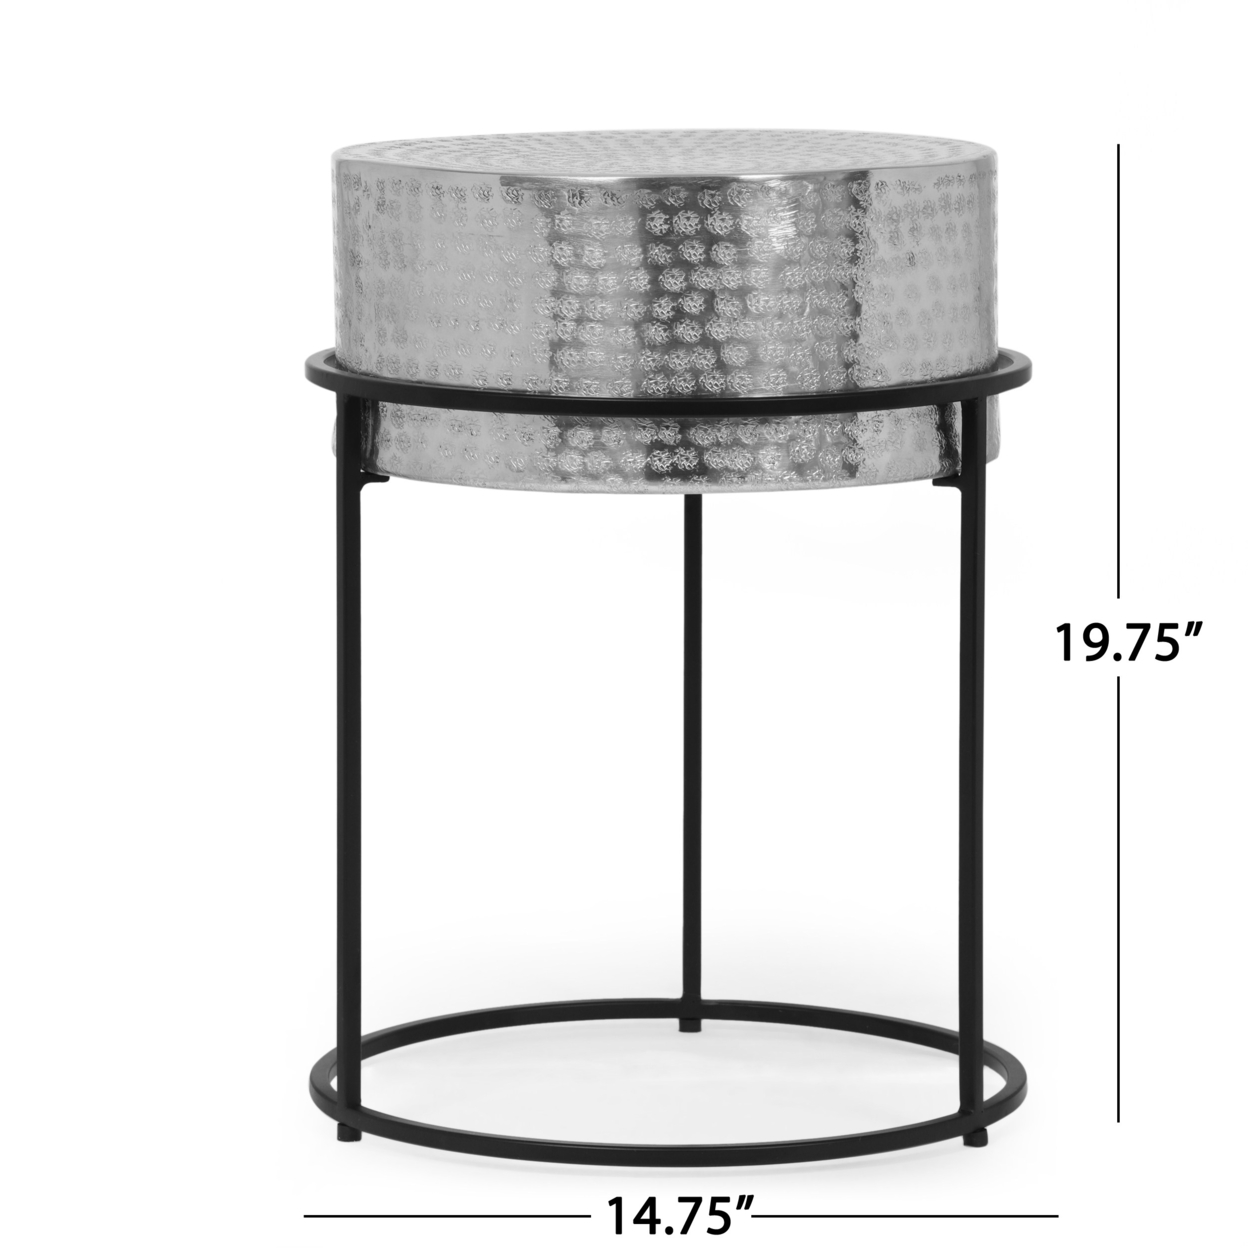 Kolczak Modern Handcrafted Aluminum Round Side Table, Silver And Black